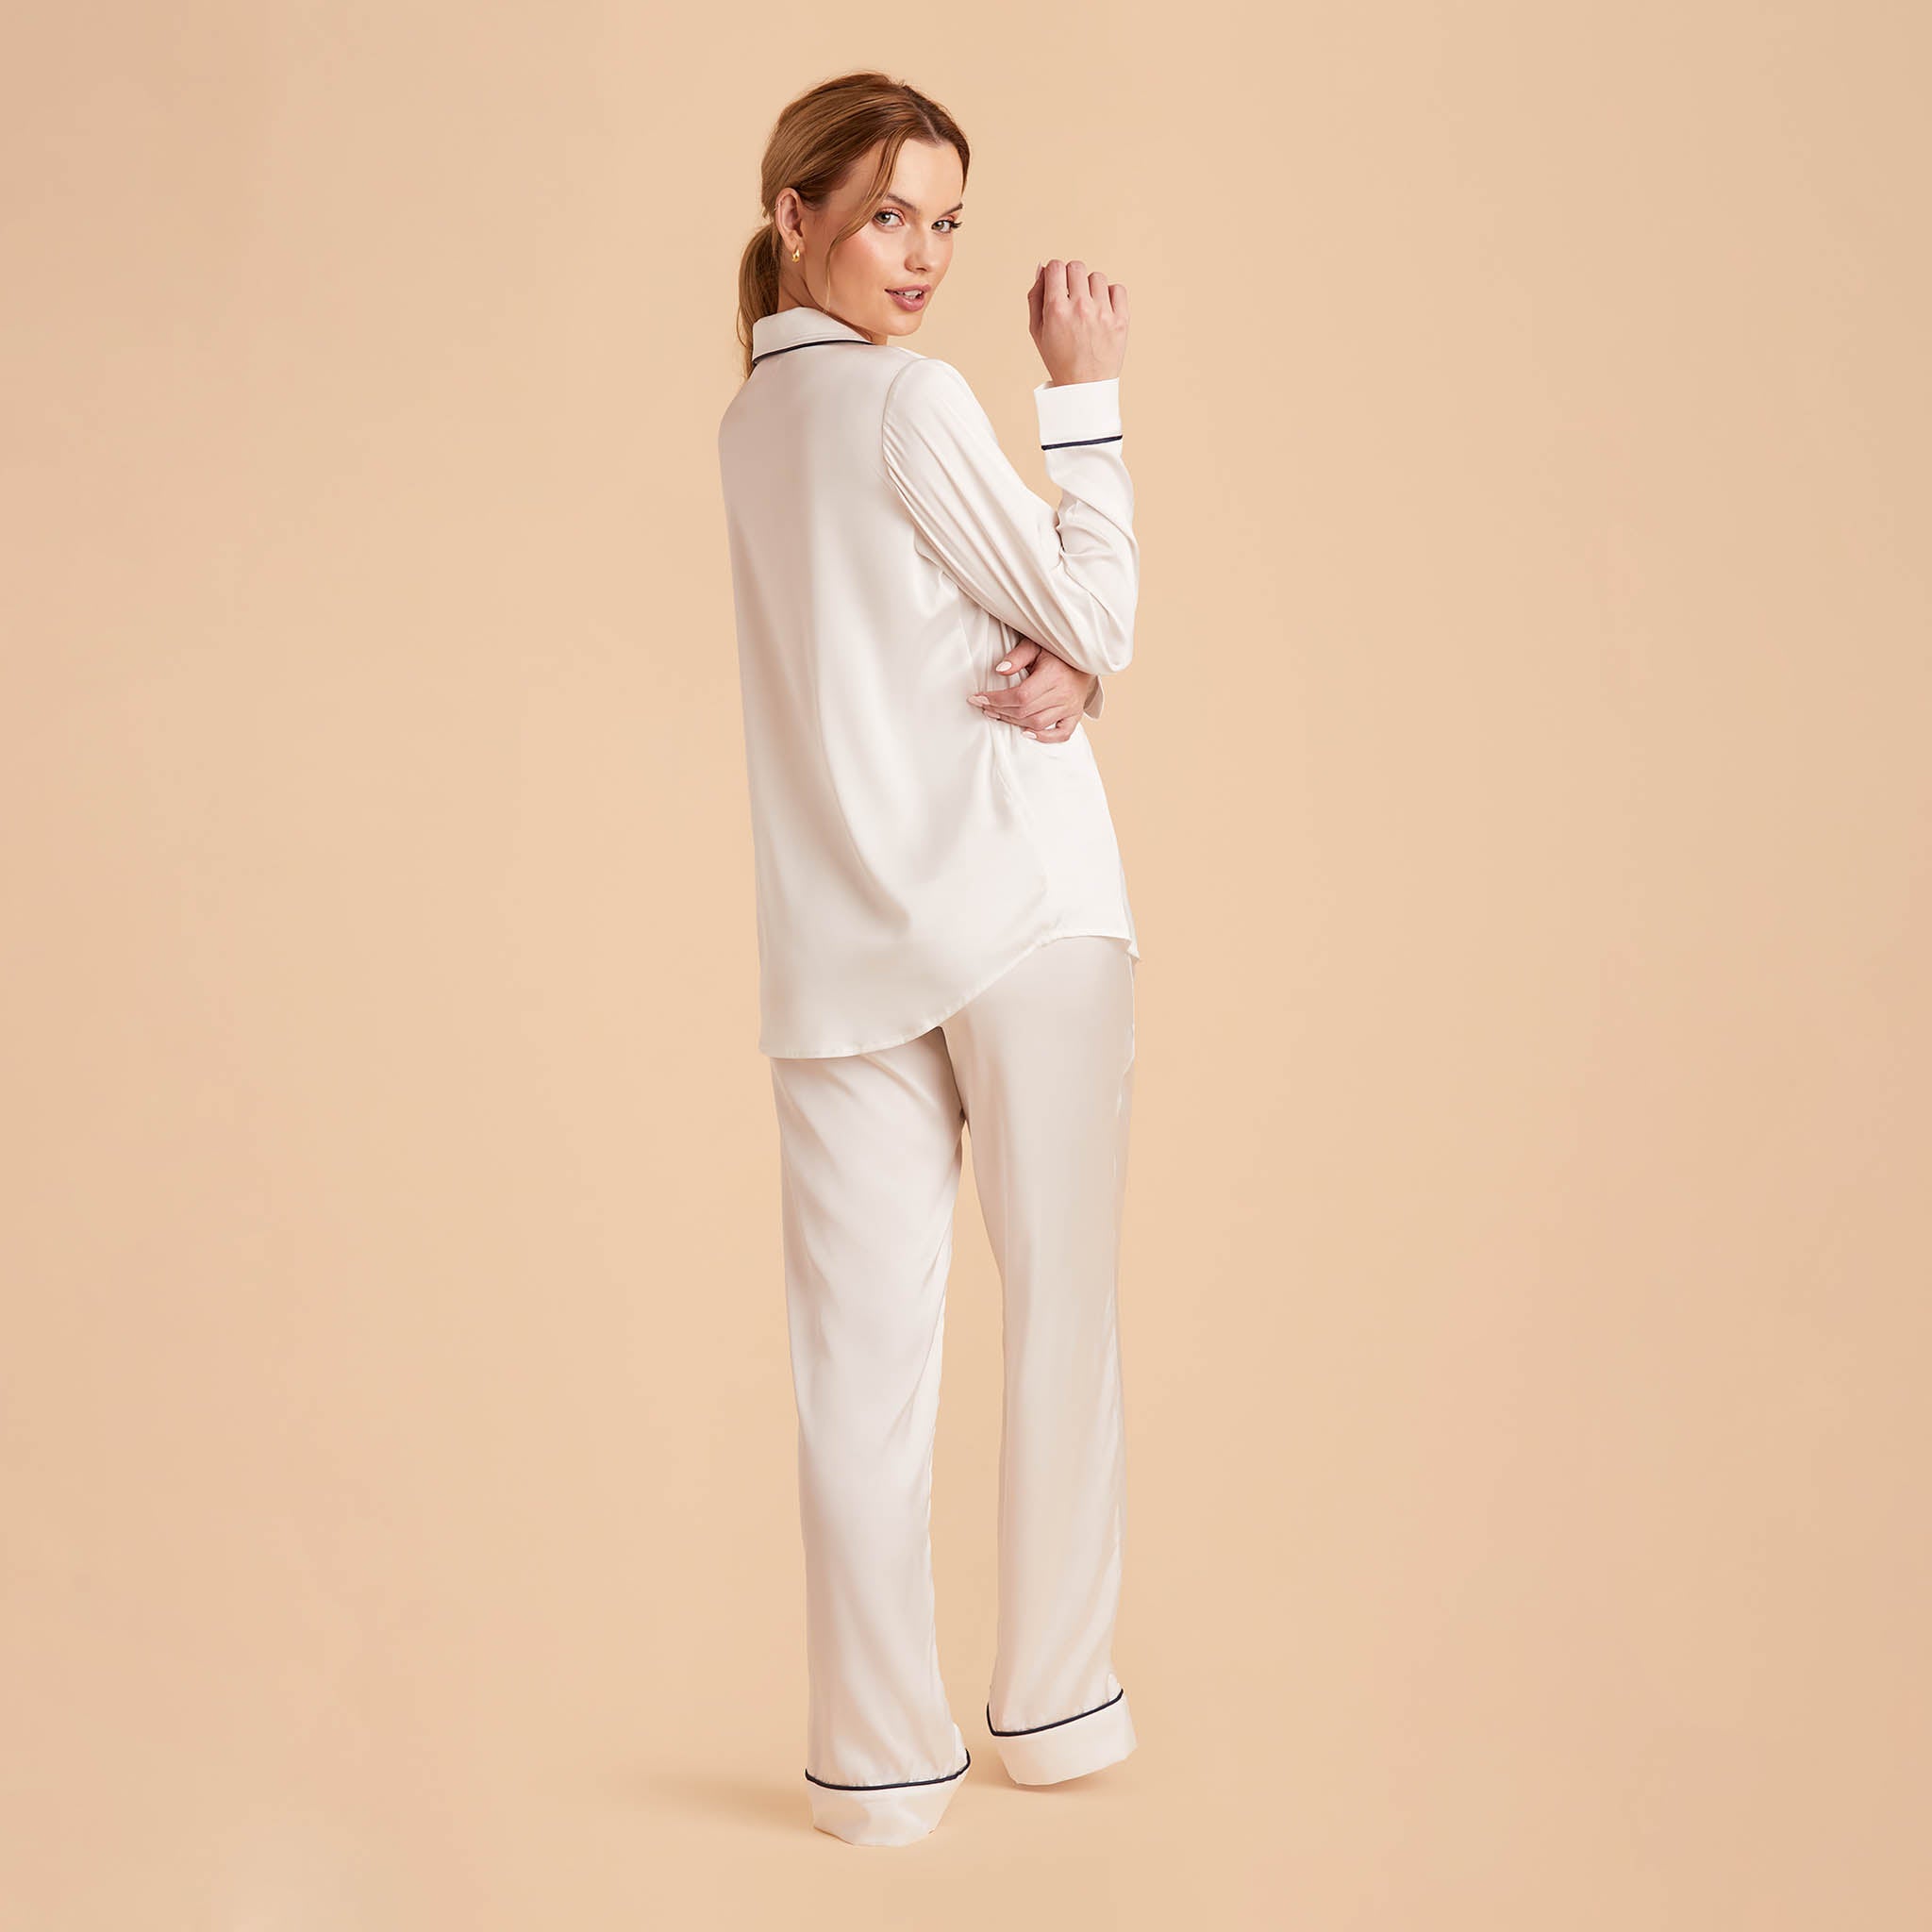 Jonny Satin Pants Bridesmaid Pajamas With White Piping in ivory, side view